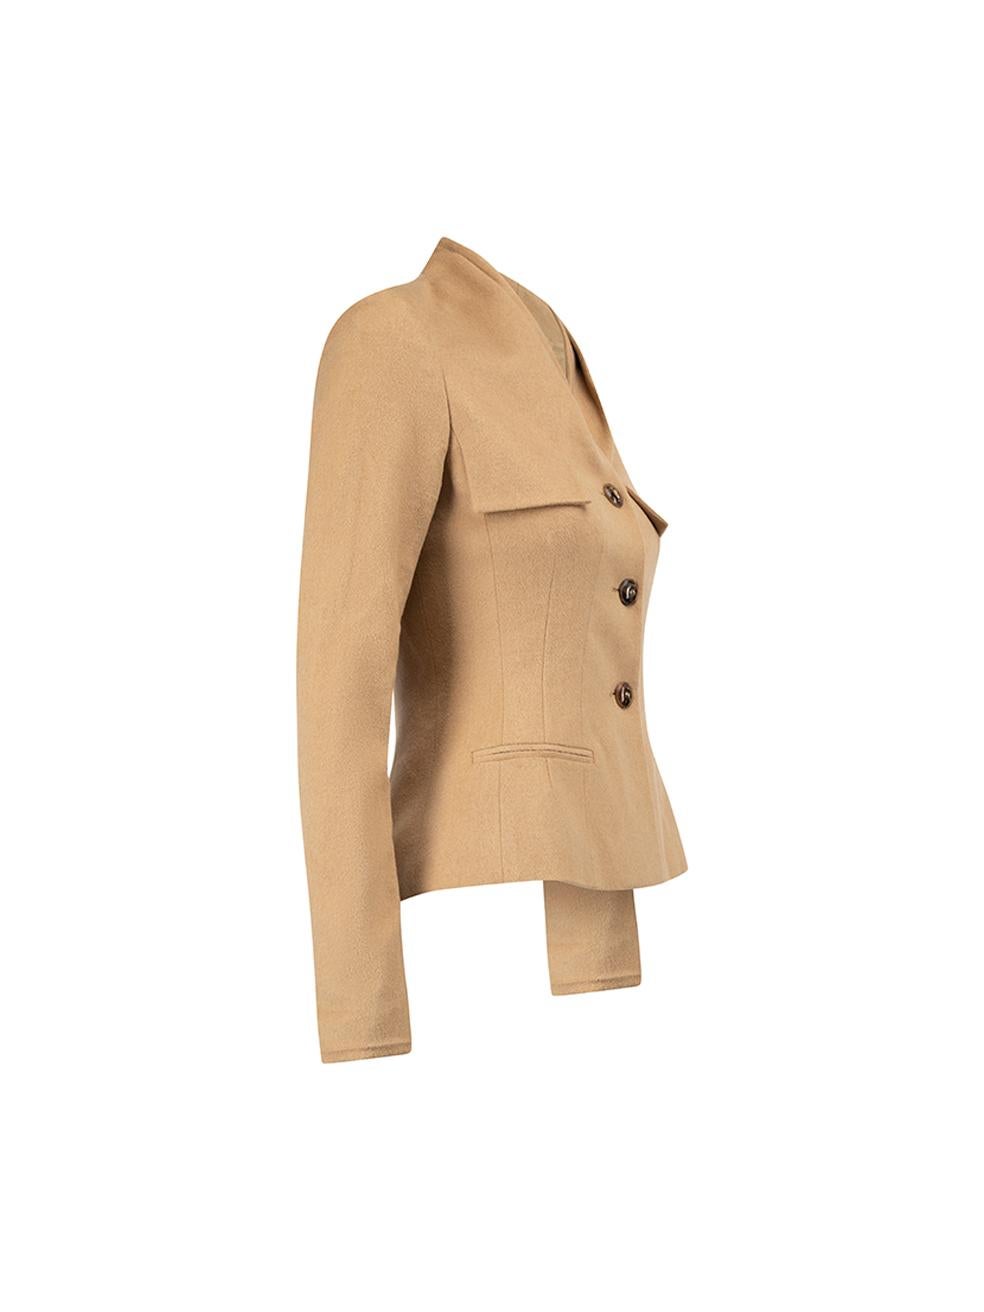 CONDITION is Very good. Hardly any visible wear to jacket is evident on this used Christian Dior designer resale item. Details Camel Camelhair wool Fitted jacket Single breasted Flap design on chest Front side welt pocket Dior oblique patterned silk